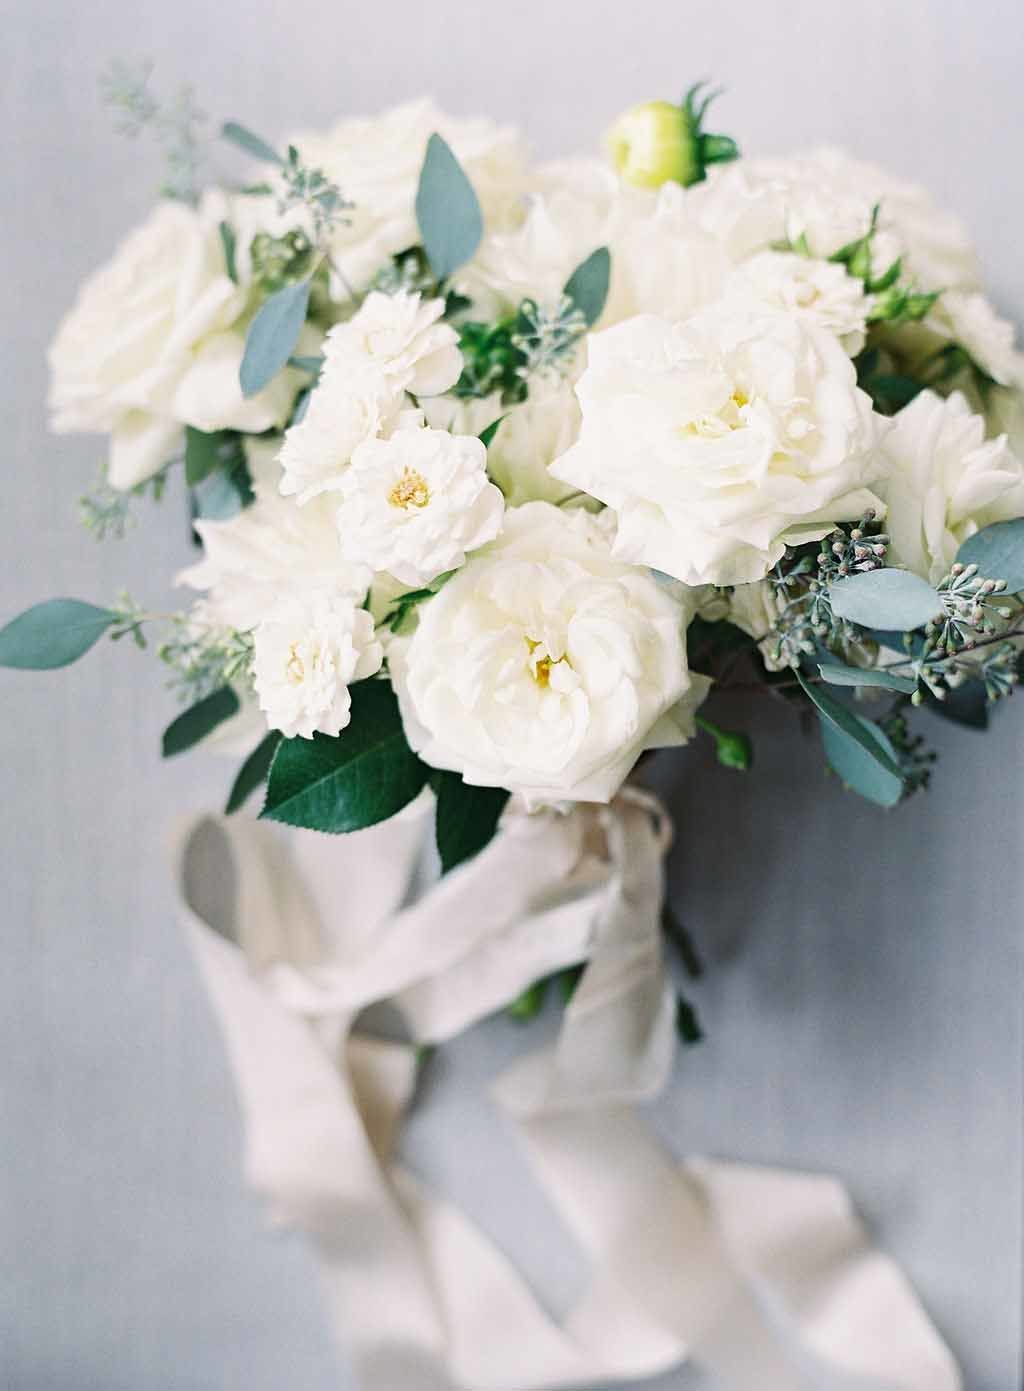 bridal bouquet of white garden roses, garden spray roses, and eucalyptus greenery with ivory ribbon streamers